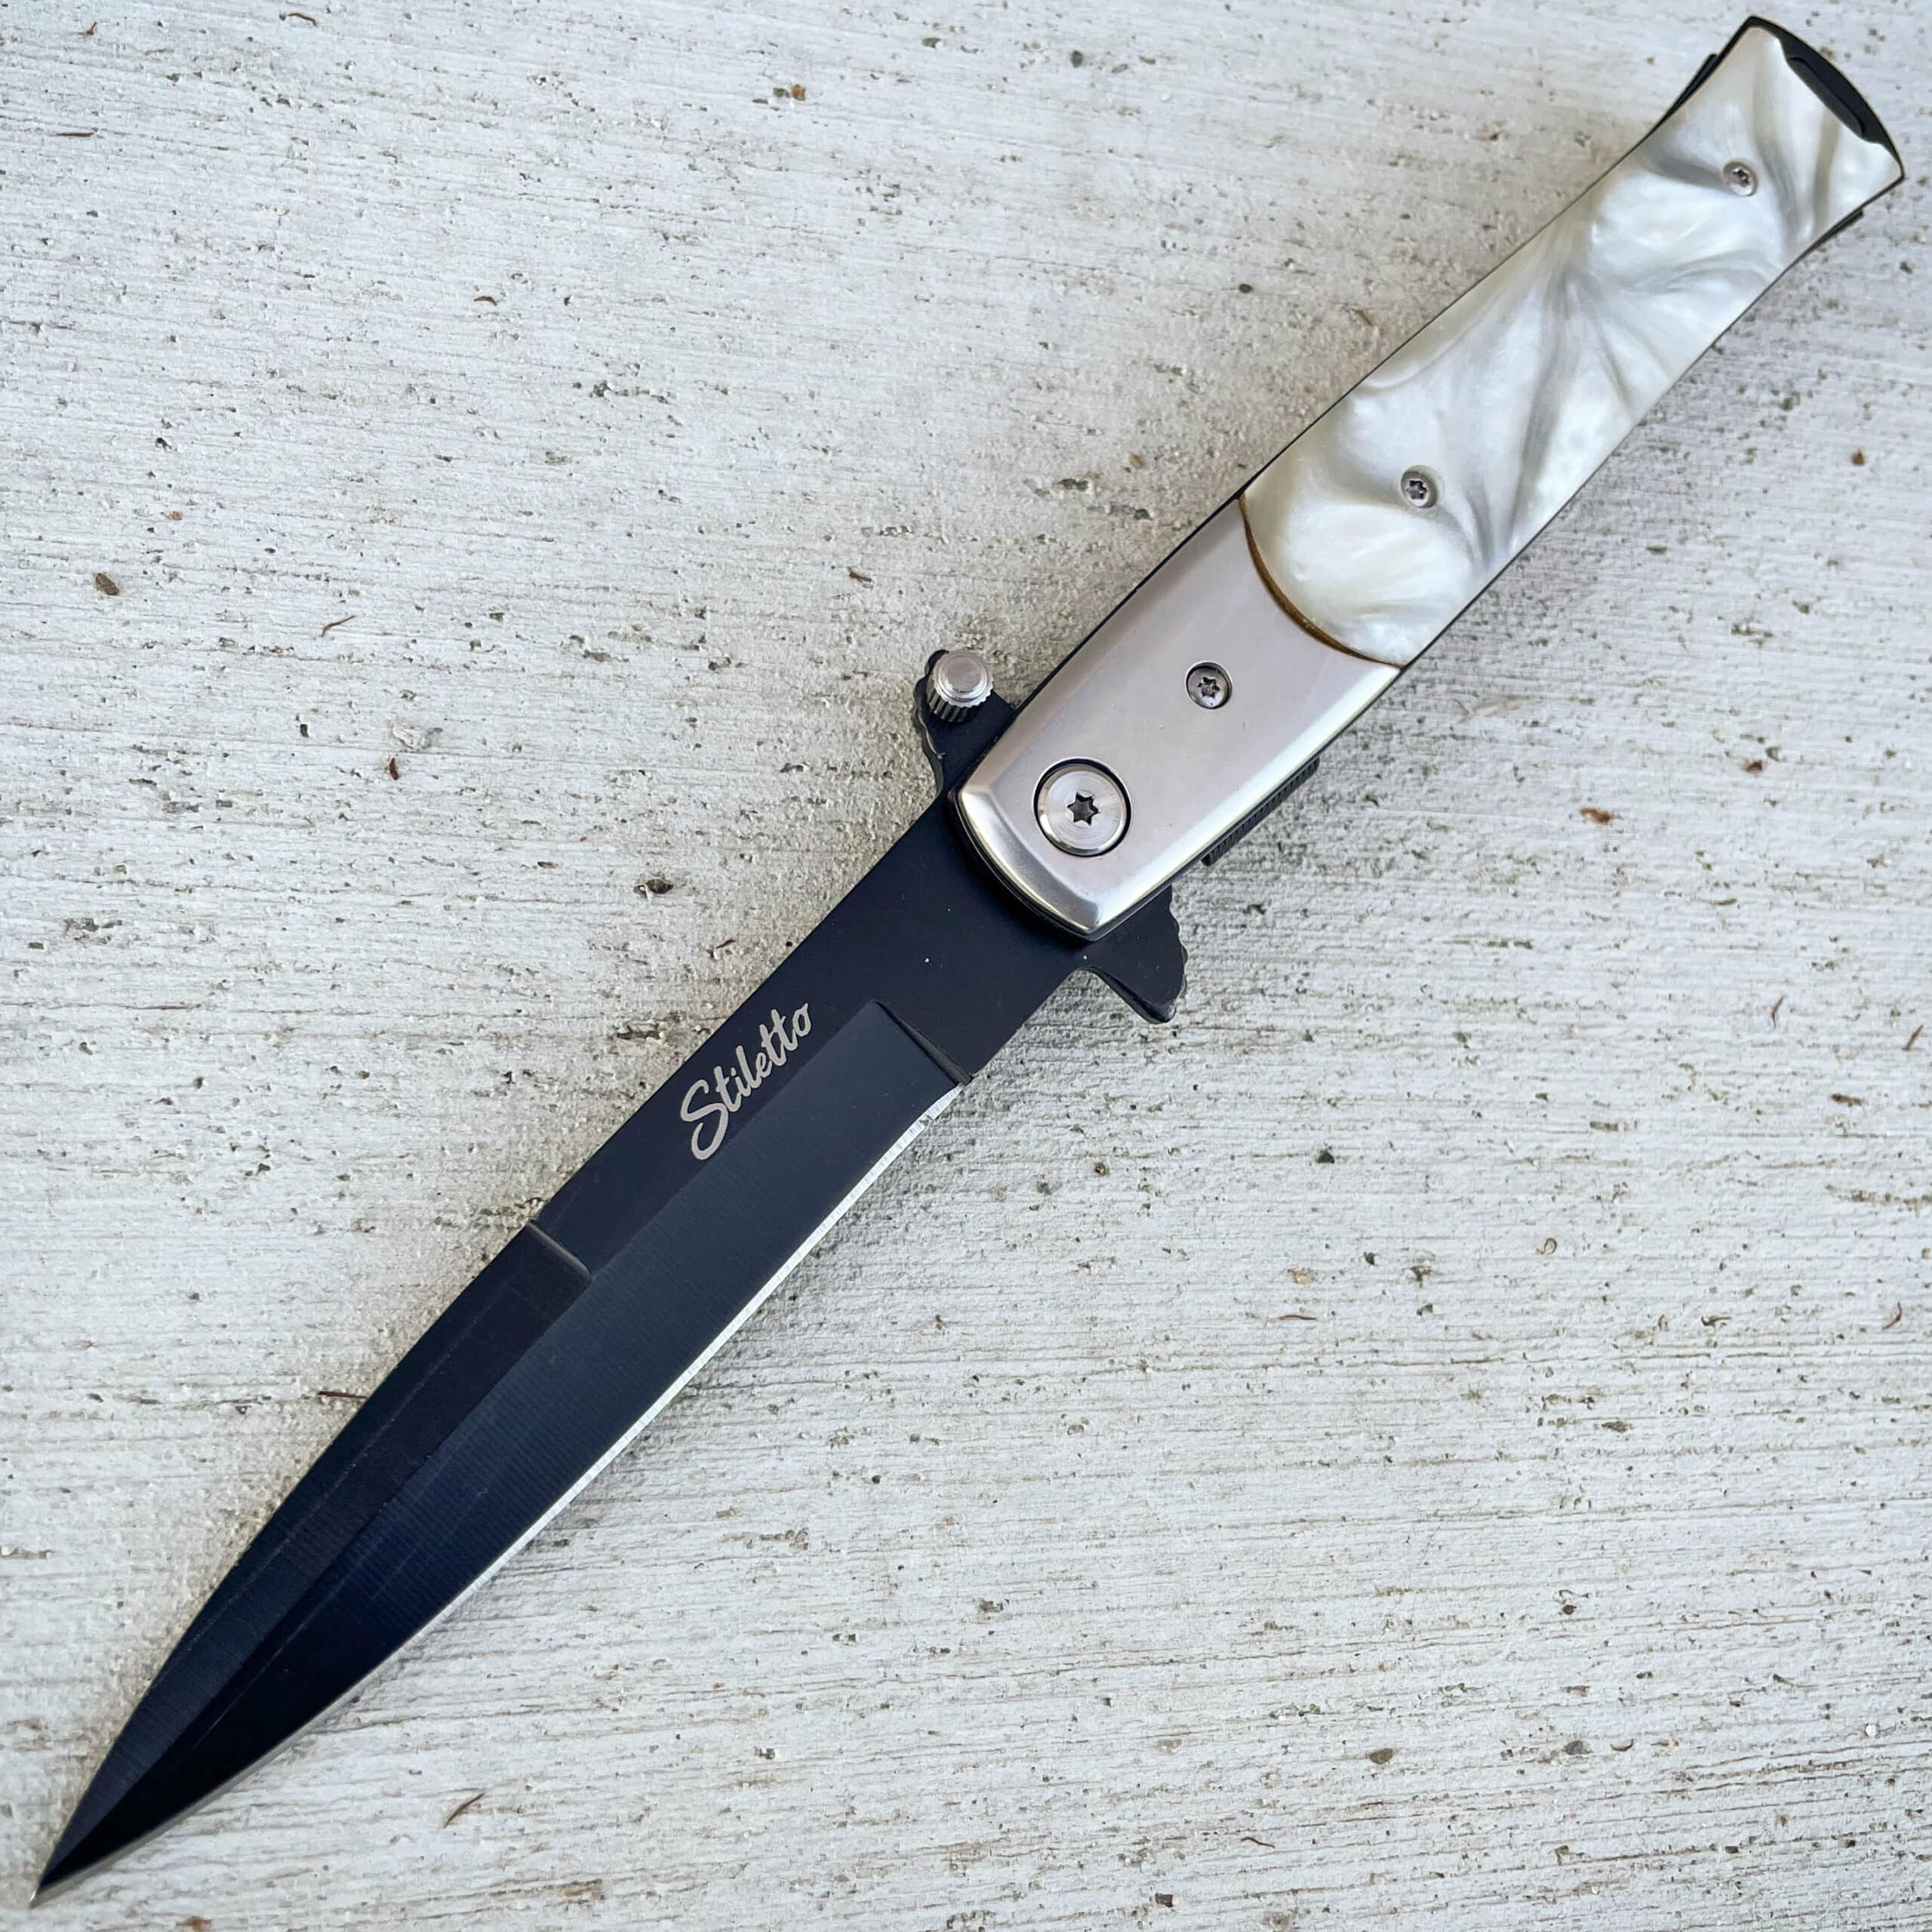 9" Italian Milano Stiletto Tactical Spring Assisted Open Pocket Knife Pearl